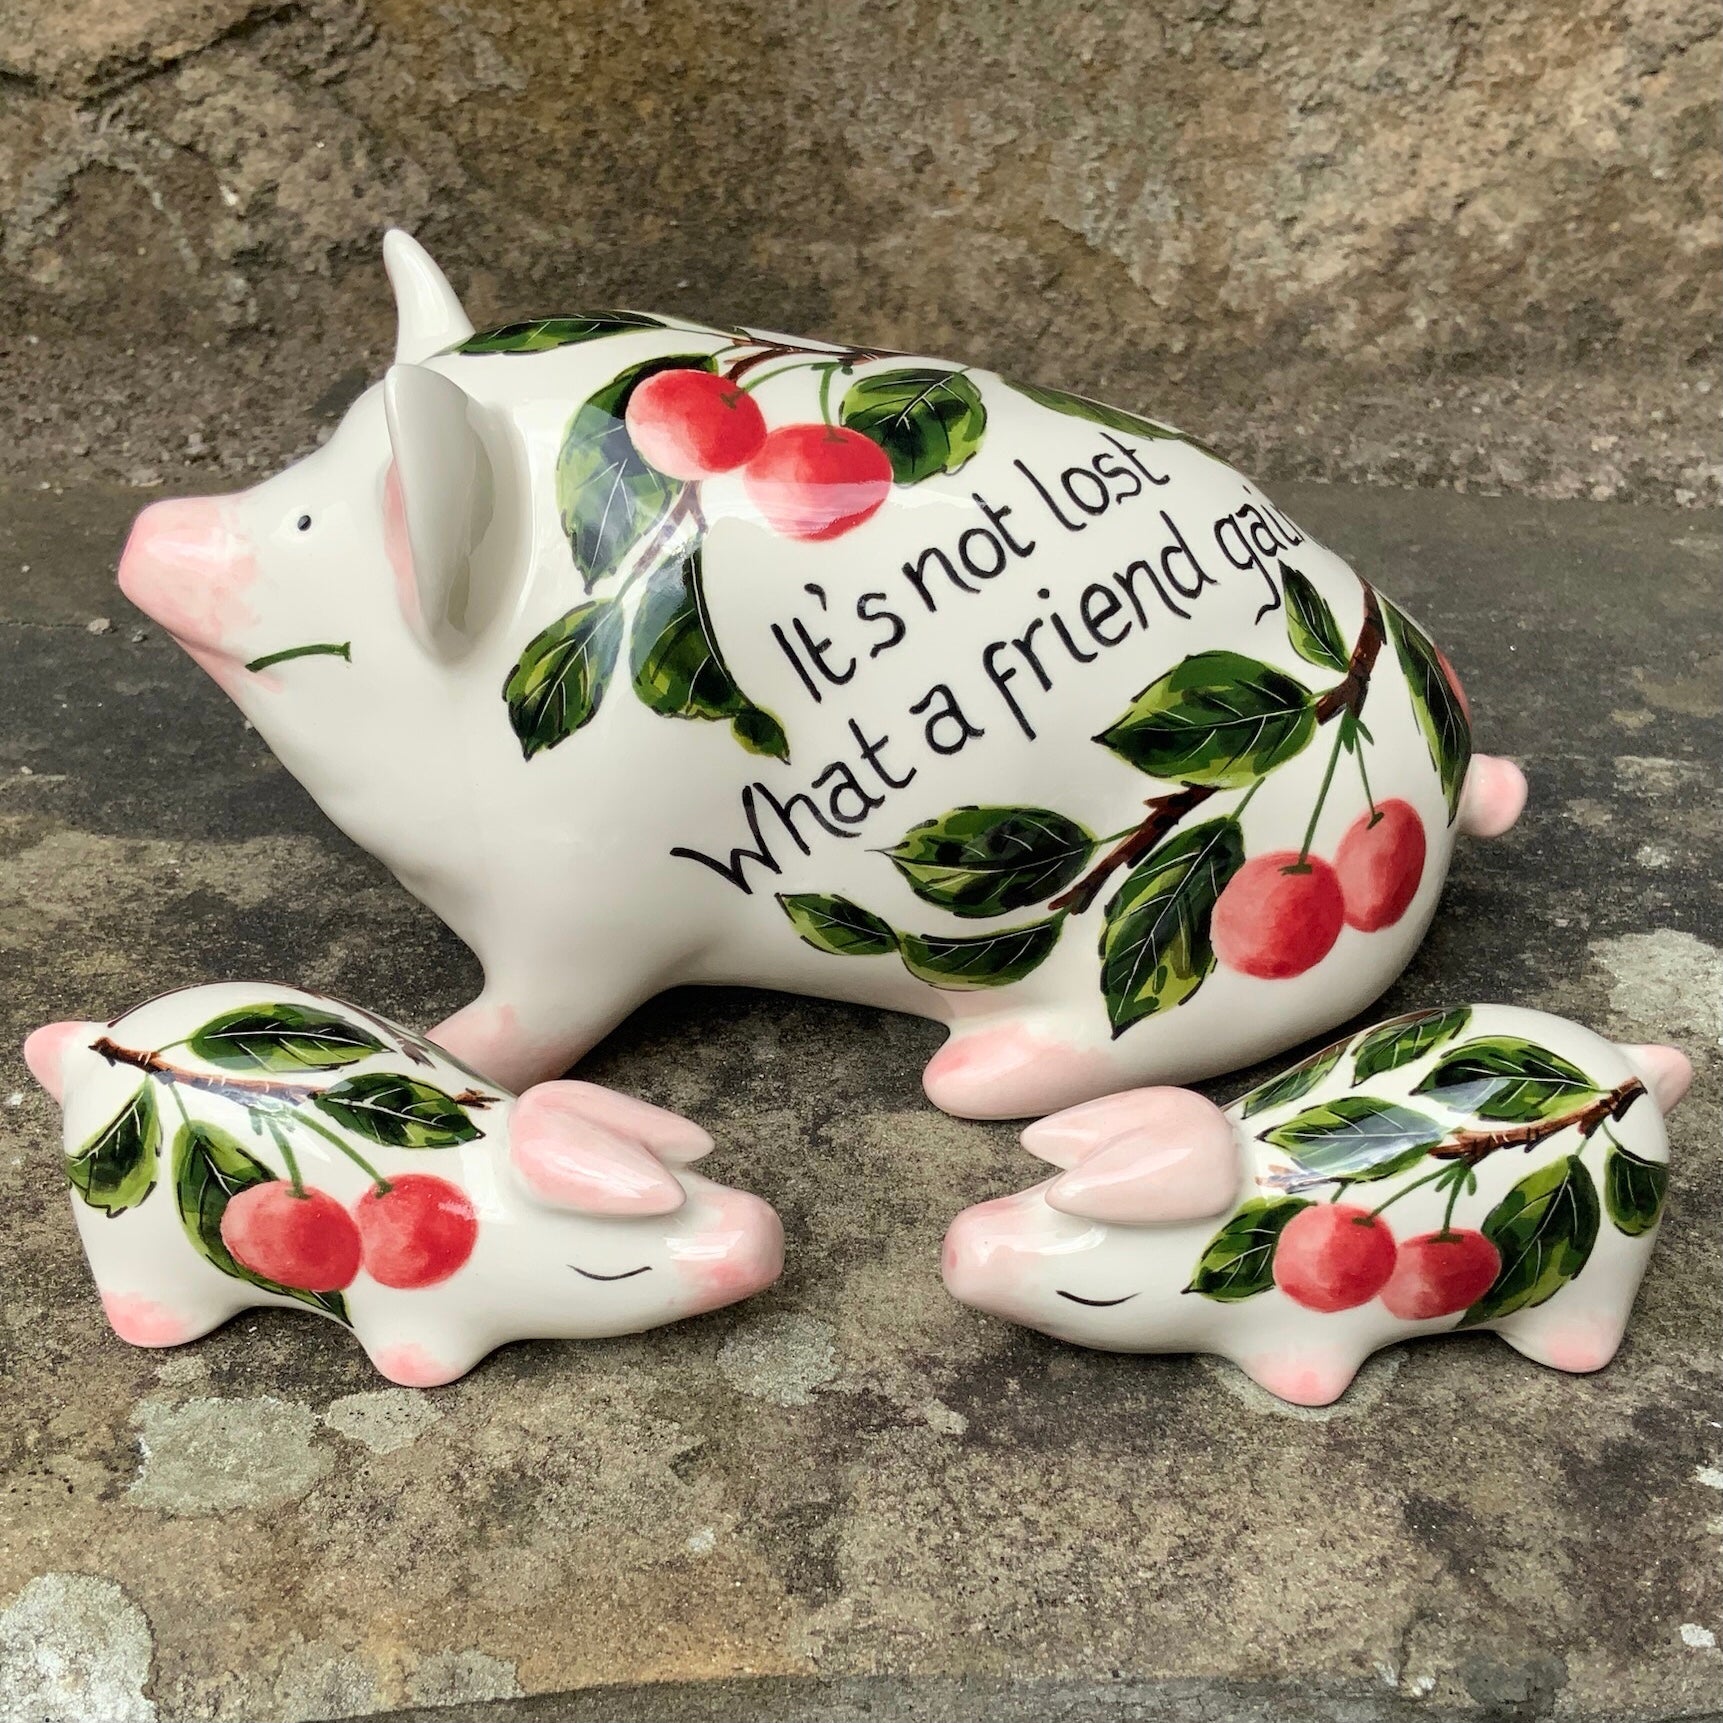 Cherry 'It's not lost what a friend gains' Small Pig